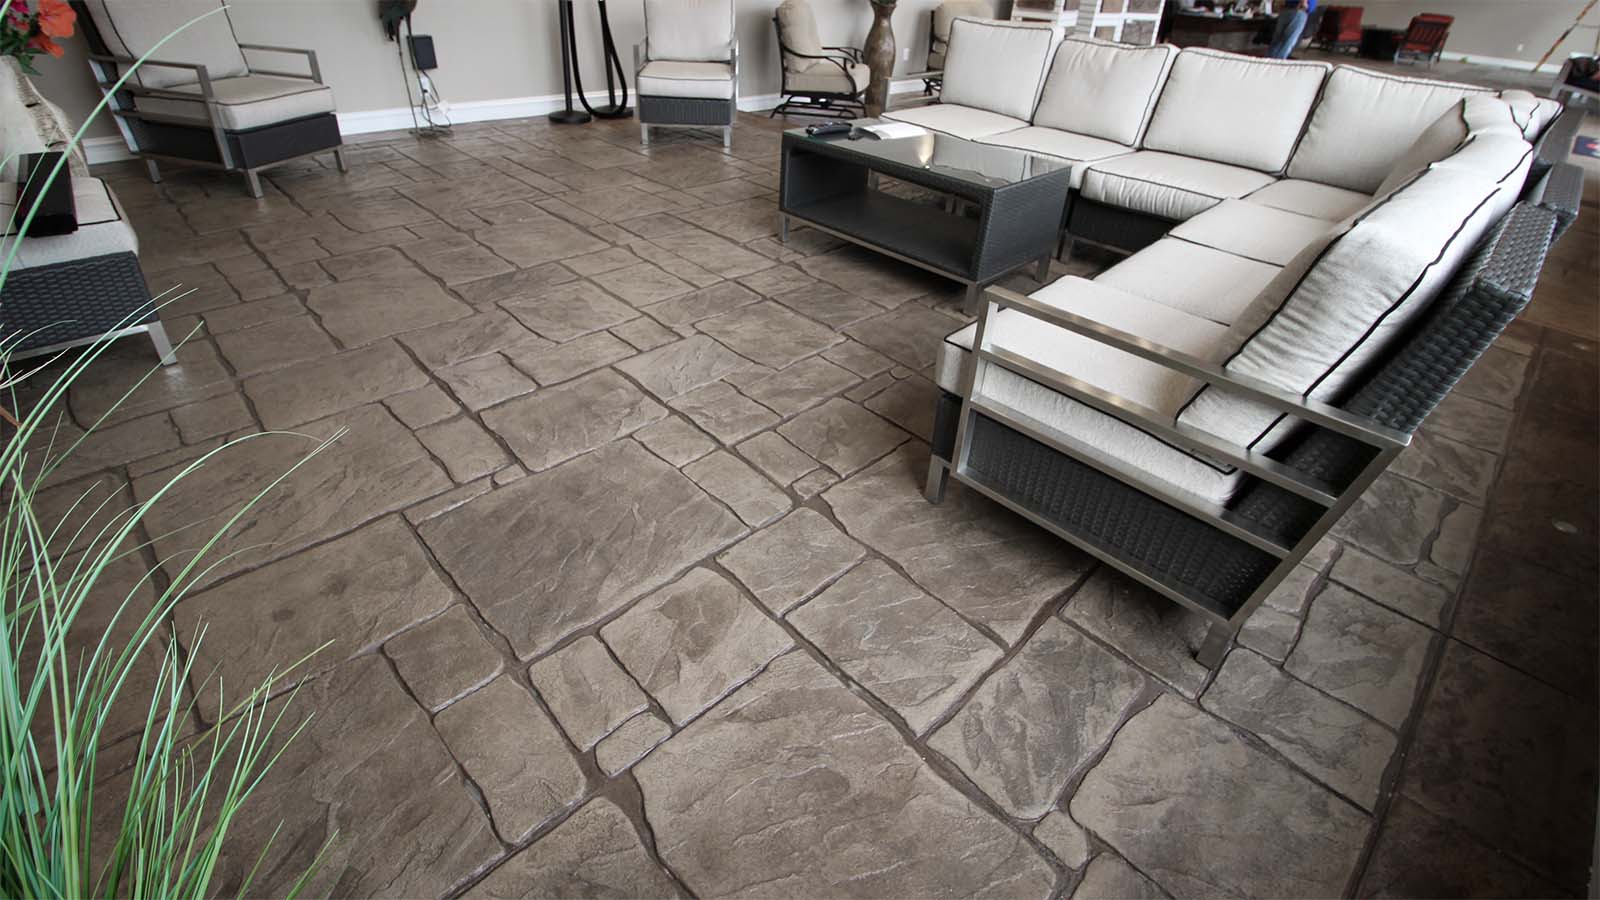 English Yorkstone stamp pattern in Shelby Township Concrete Showroom